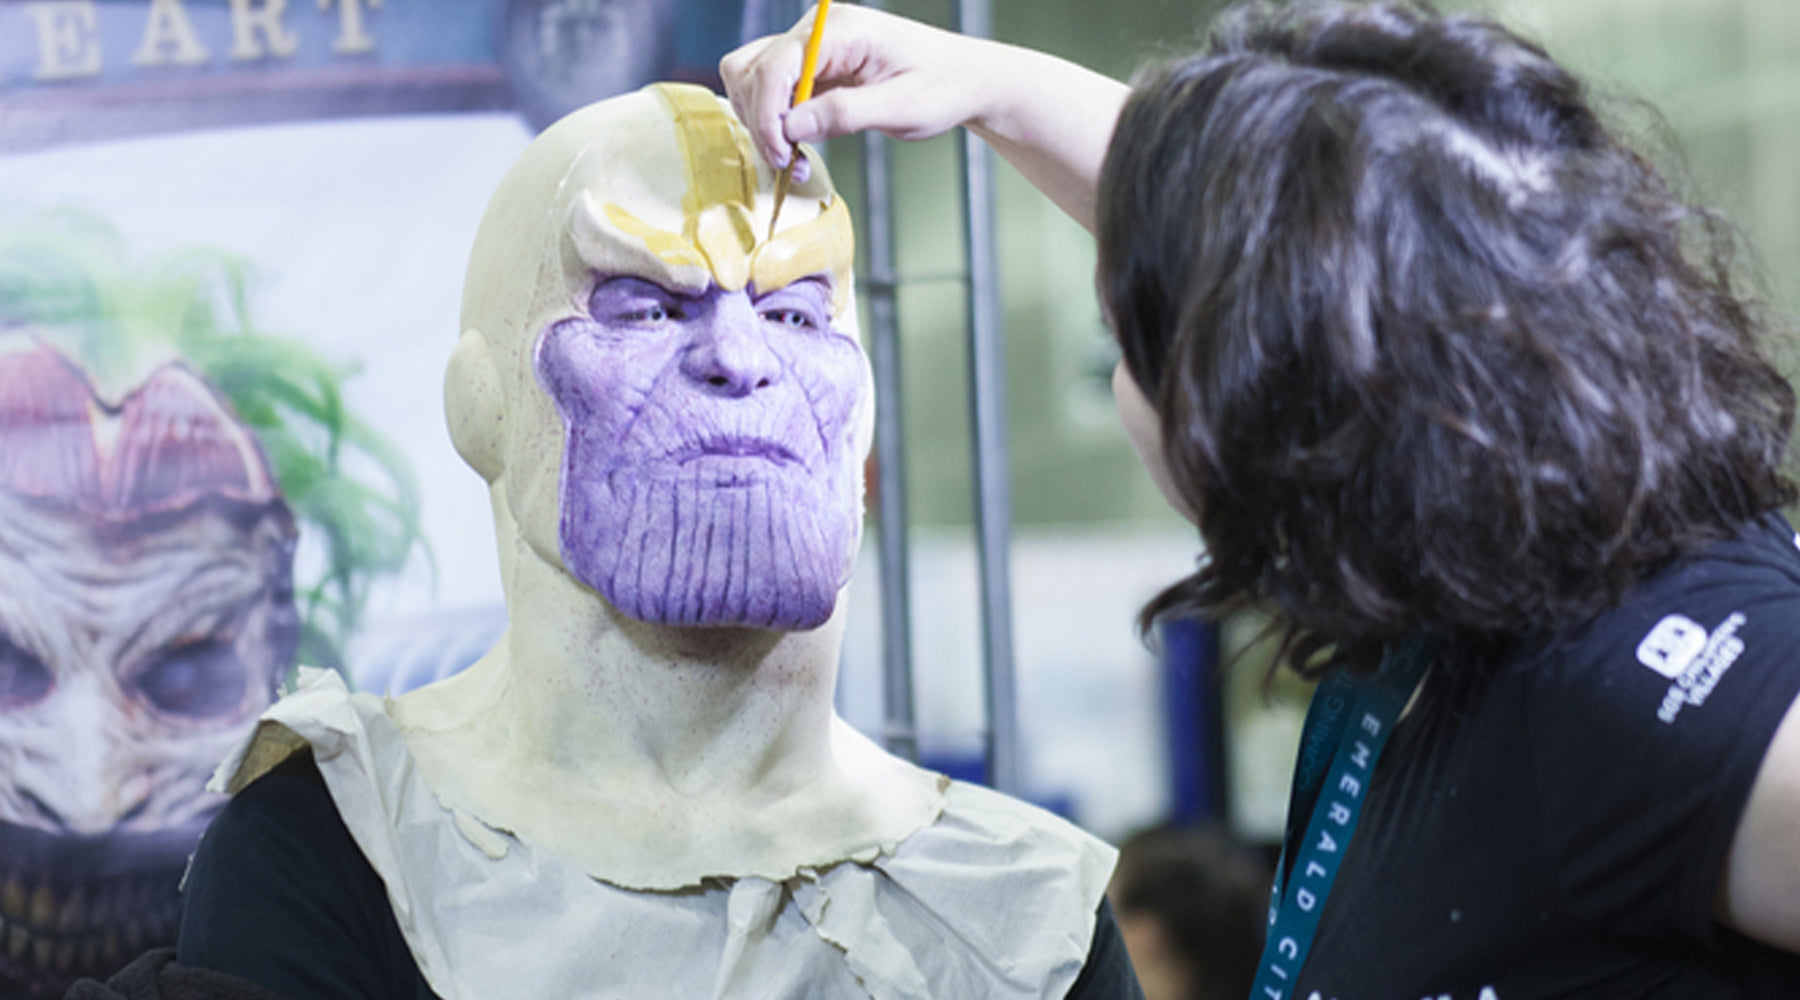 A Complete Guide to Becoming An SFX Makeup Artist